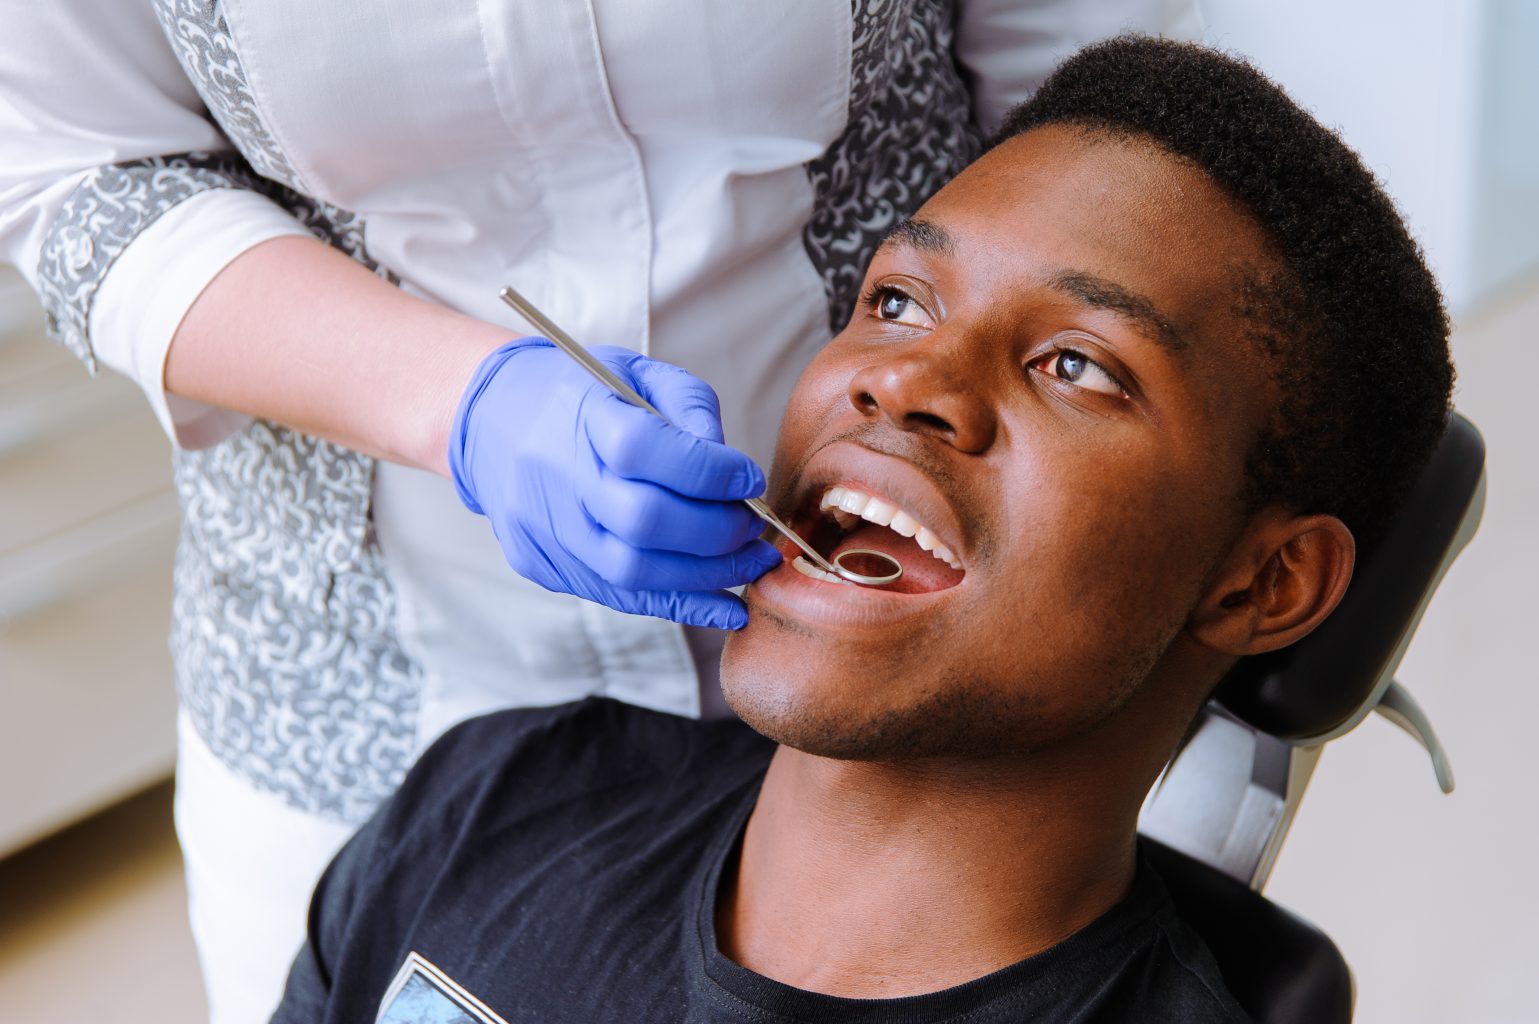 African Male Patient Getting Dental Treatment In Dental Clinic